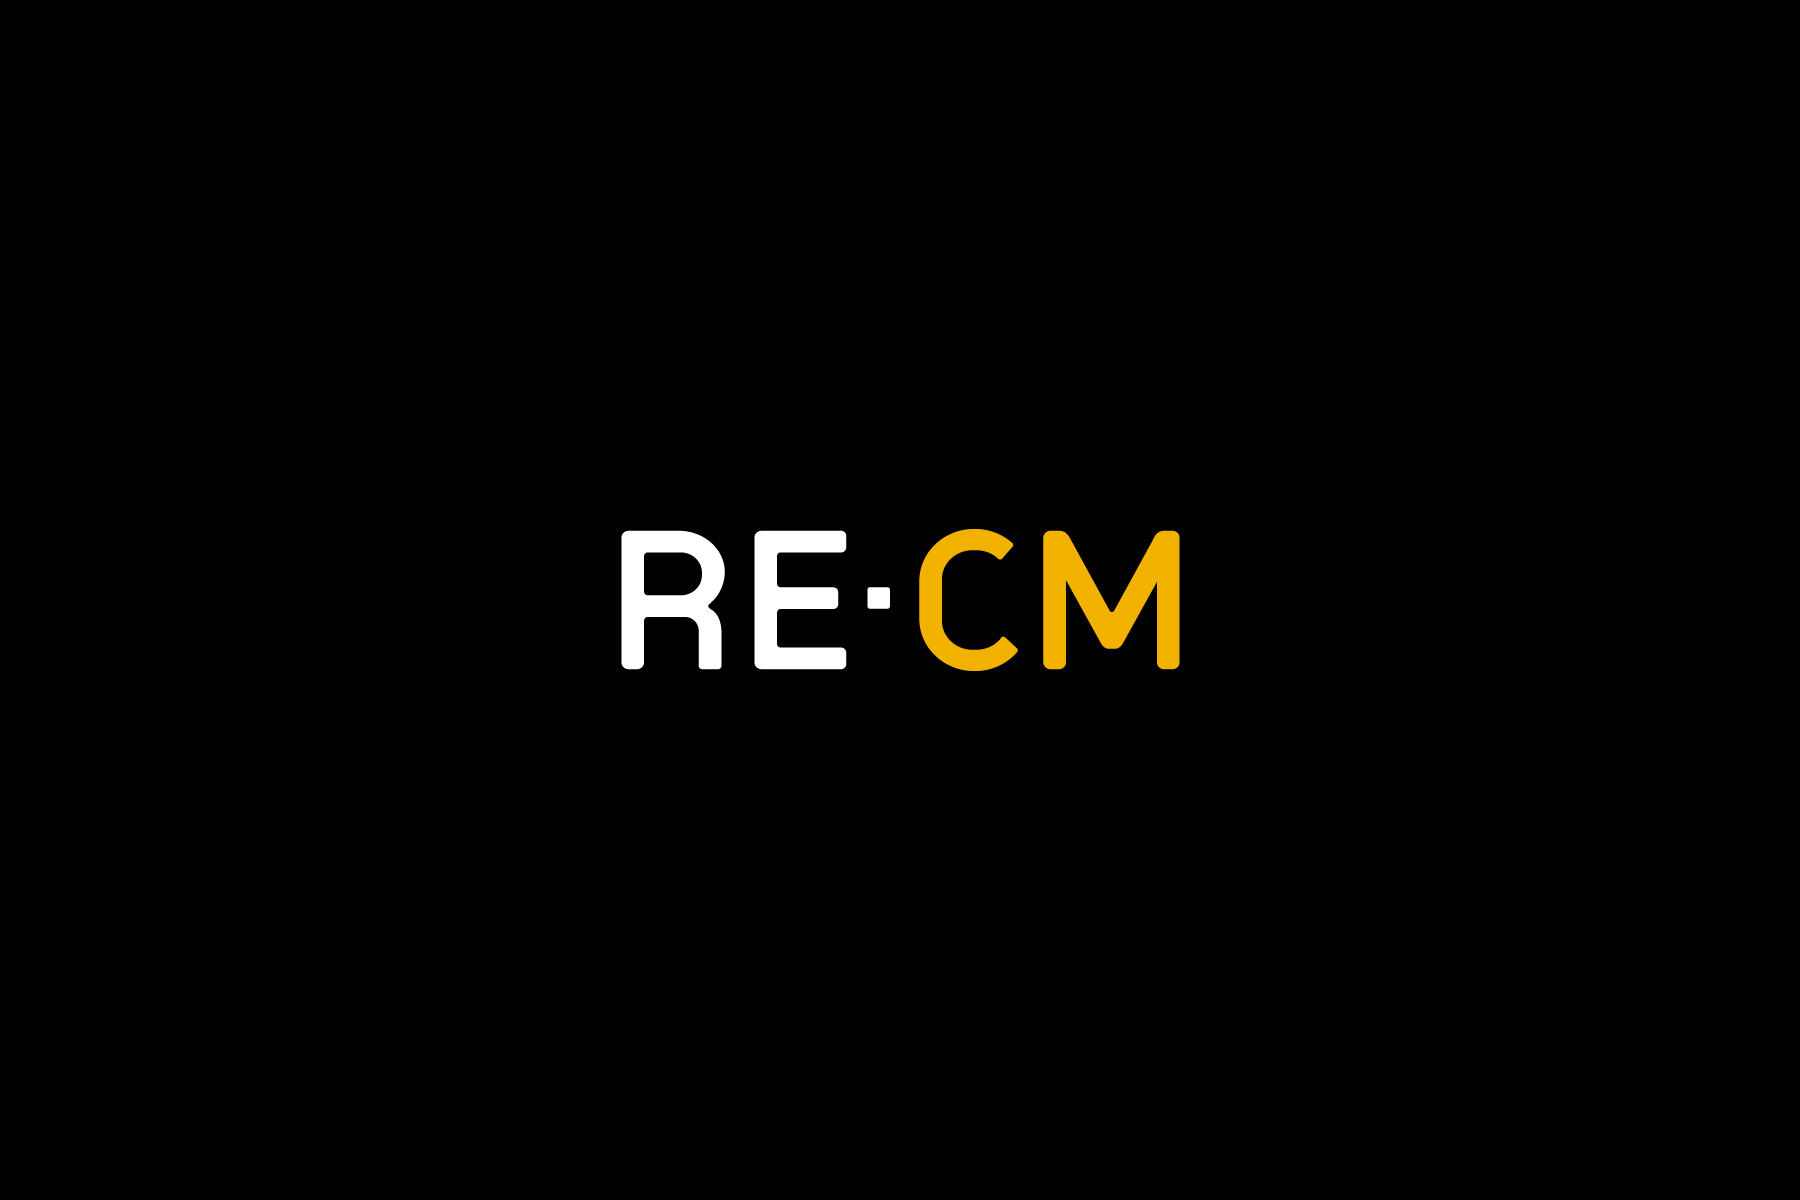 RE•CM came to Firedog with a garish identity (In silver and orange) which did not convey their values. Our first step was to redefine the logotype and create a confident and serious colour palette.